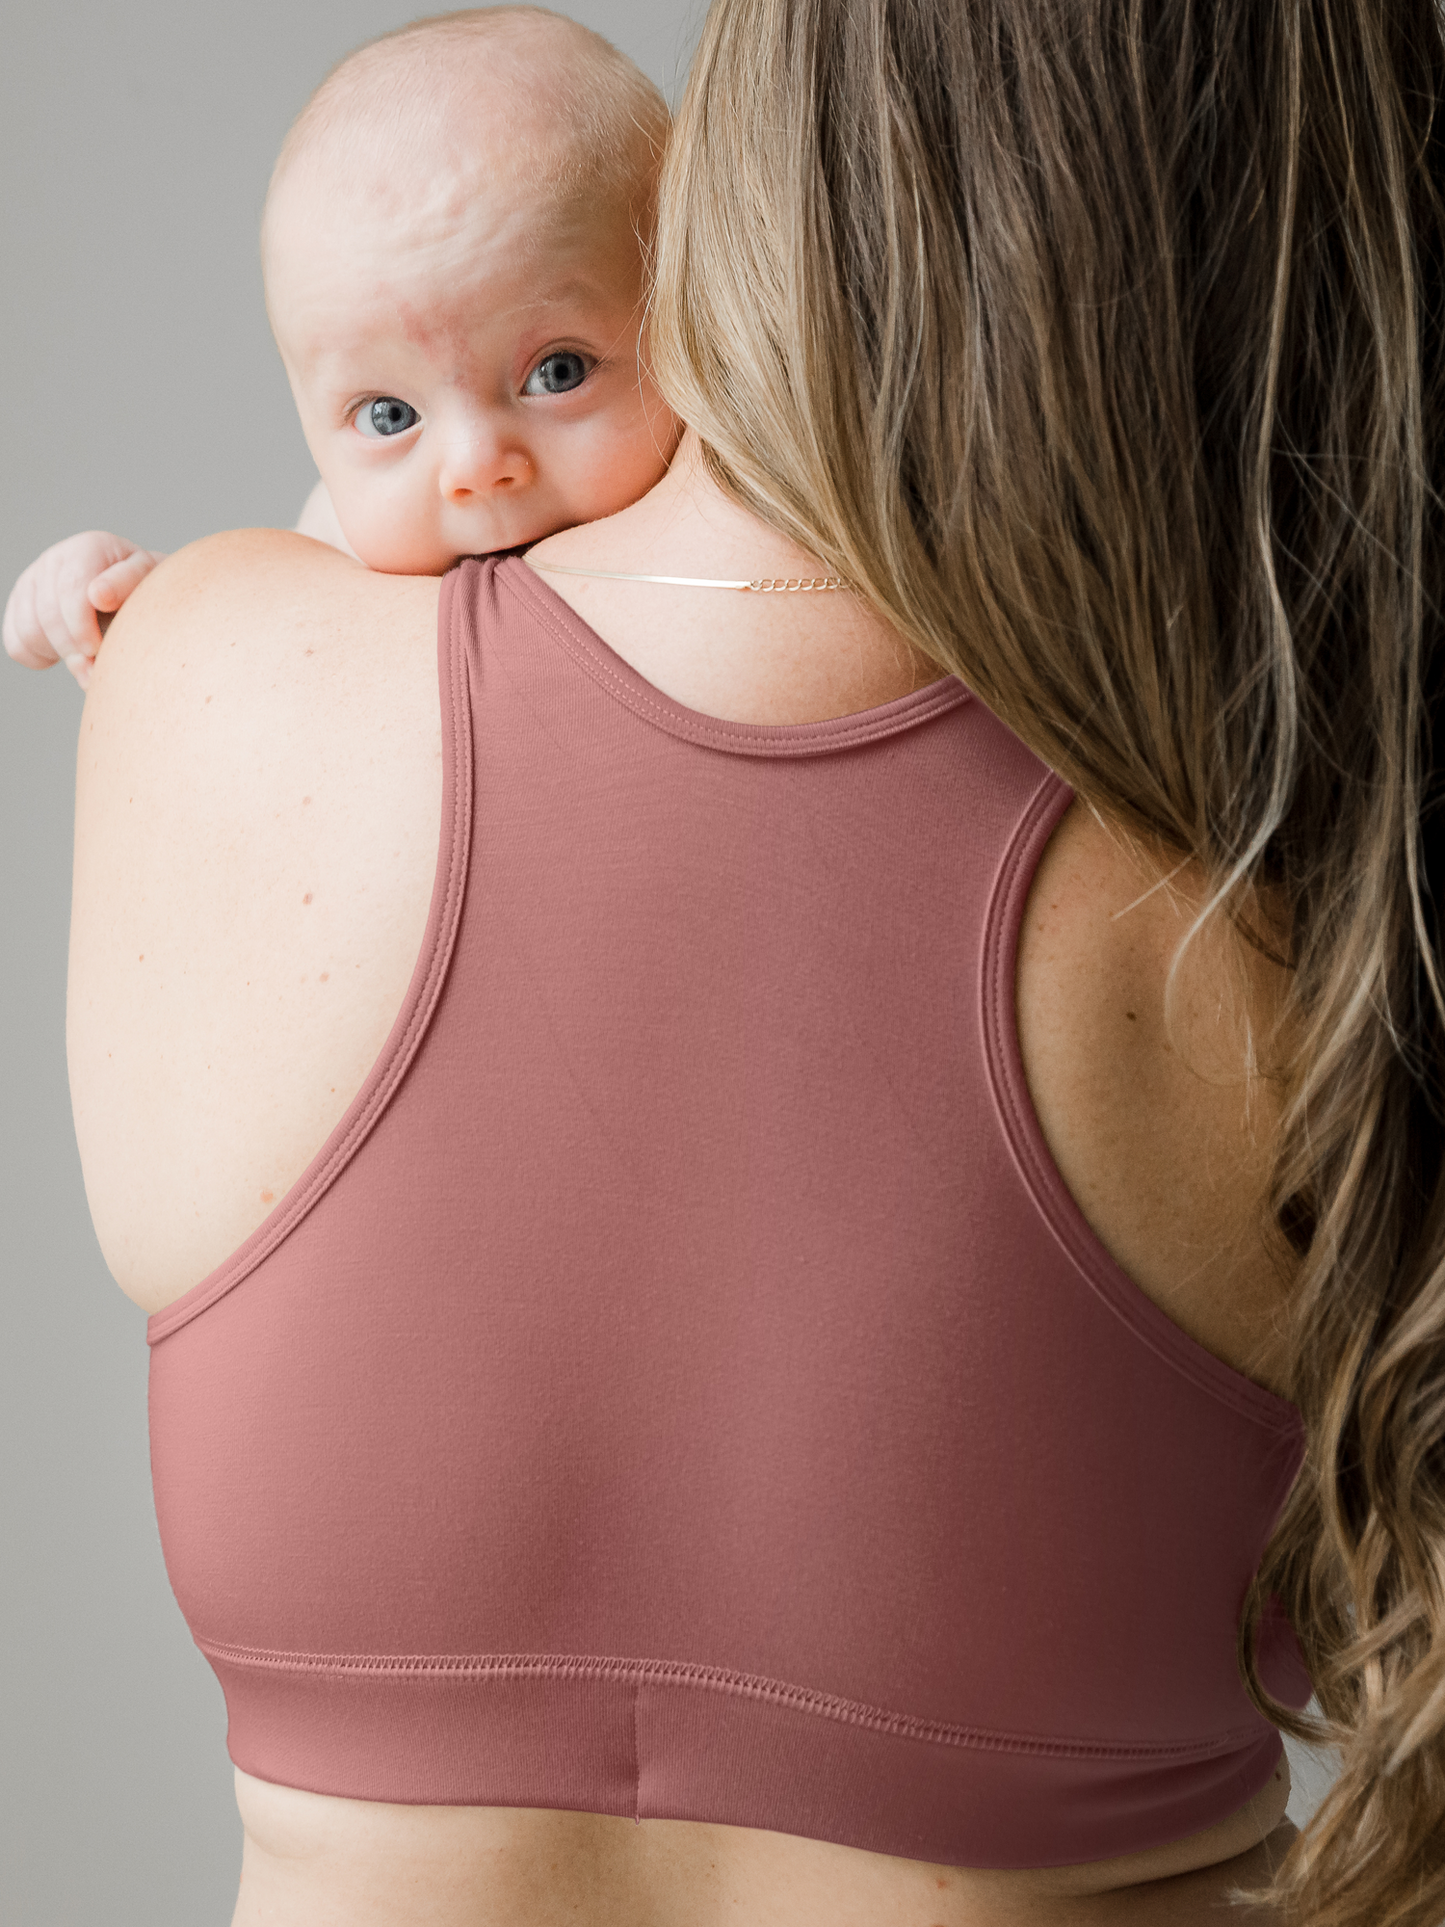 Racerback Nursing Bra in Redwood with a baby peeking over the mother's shoulder.